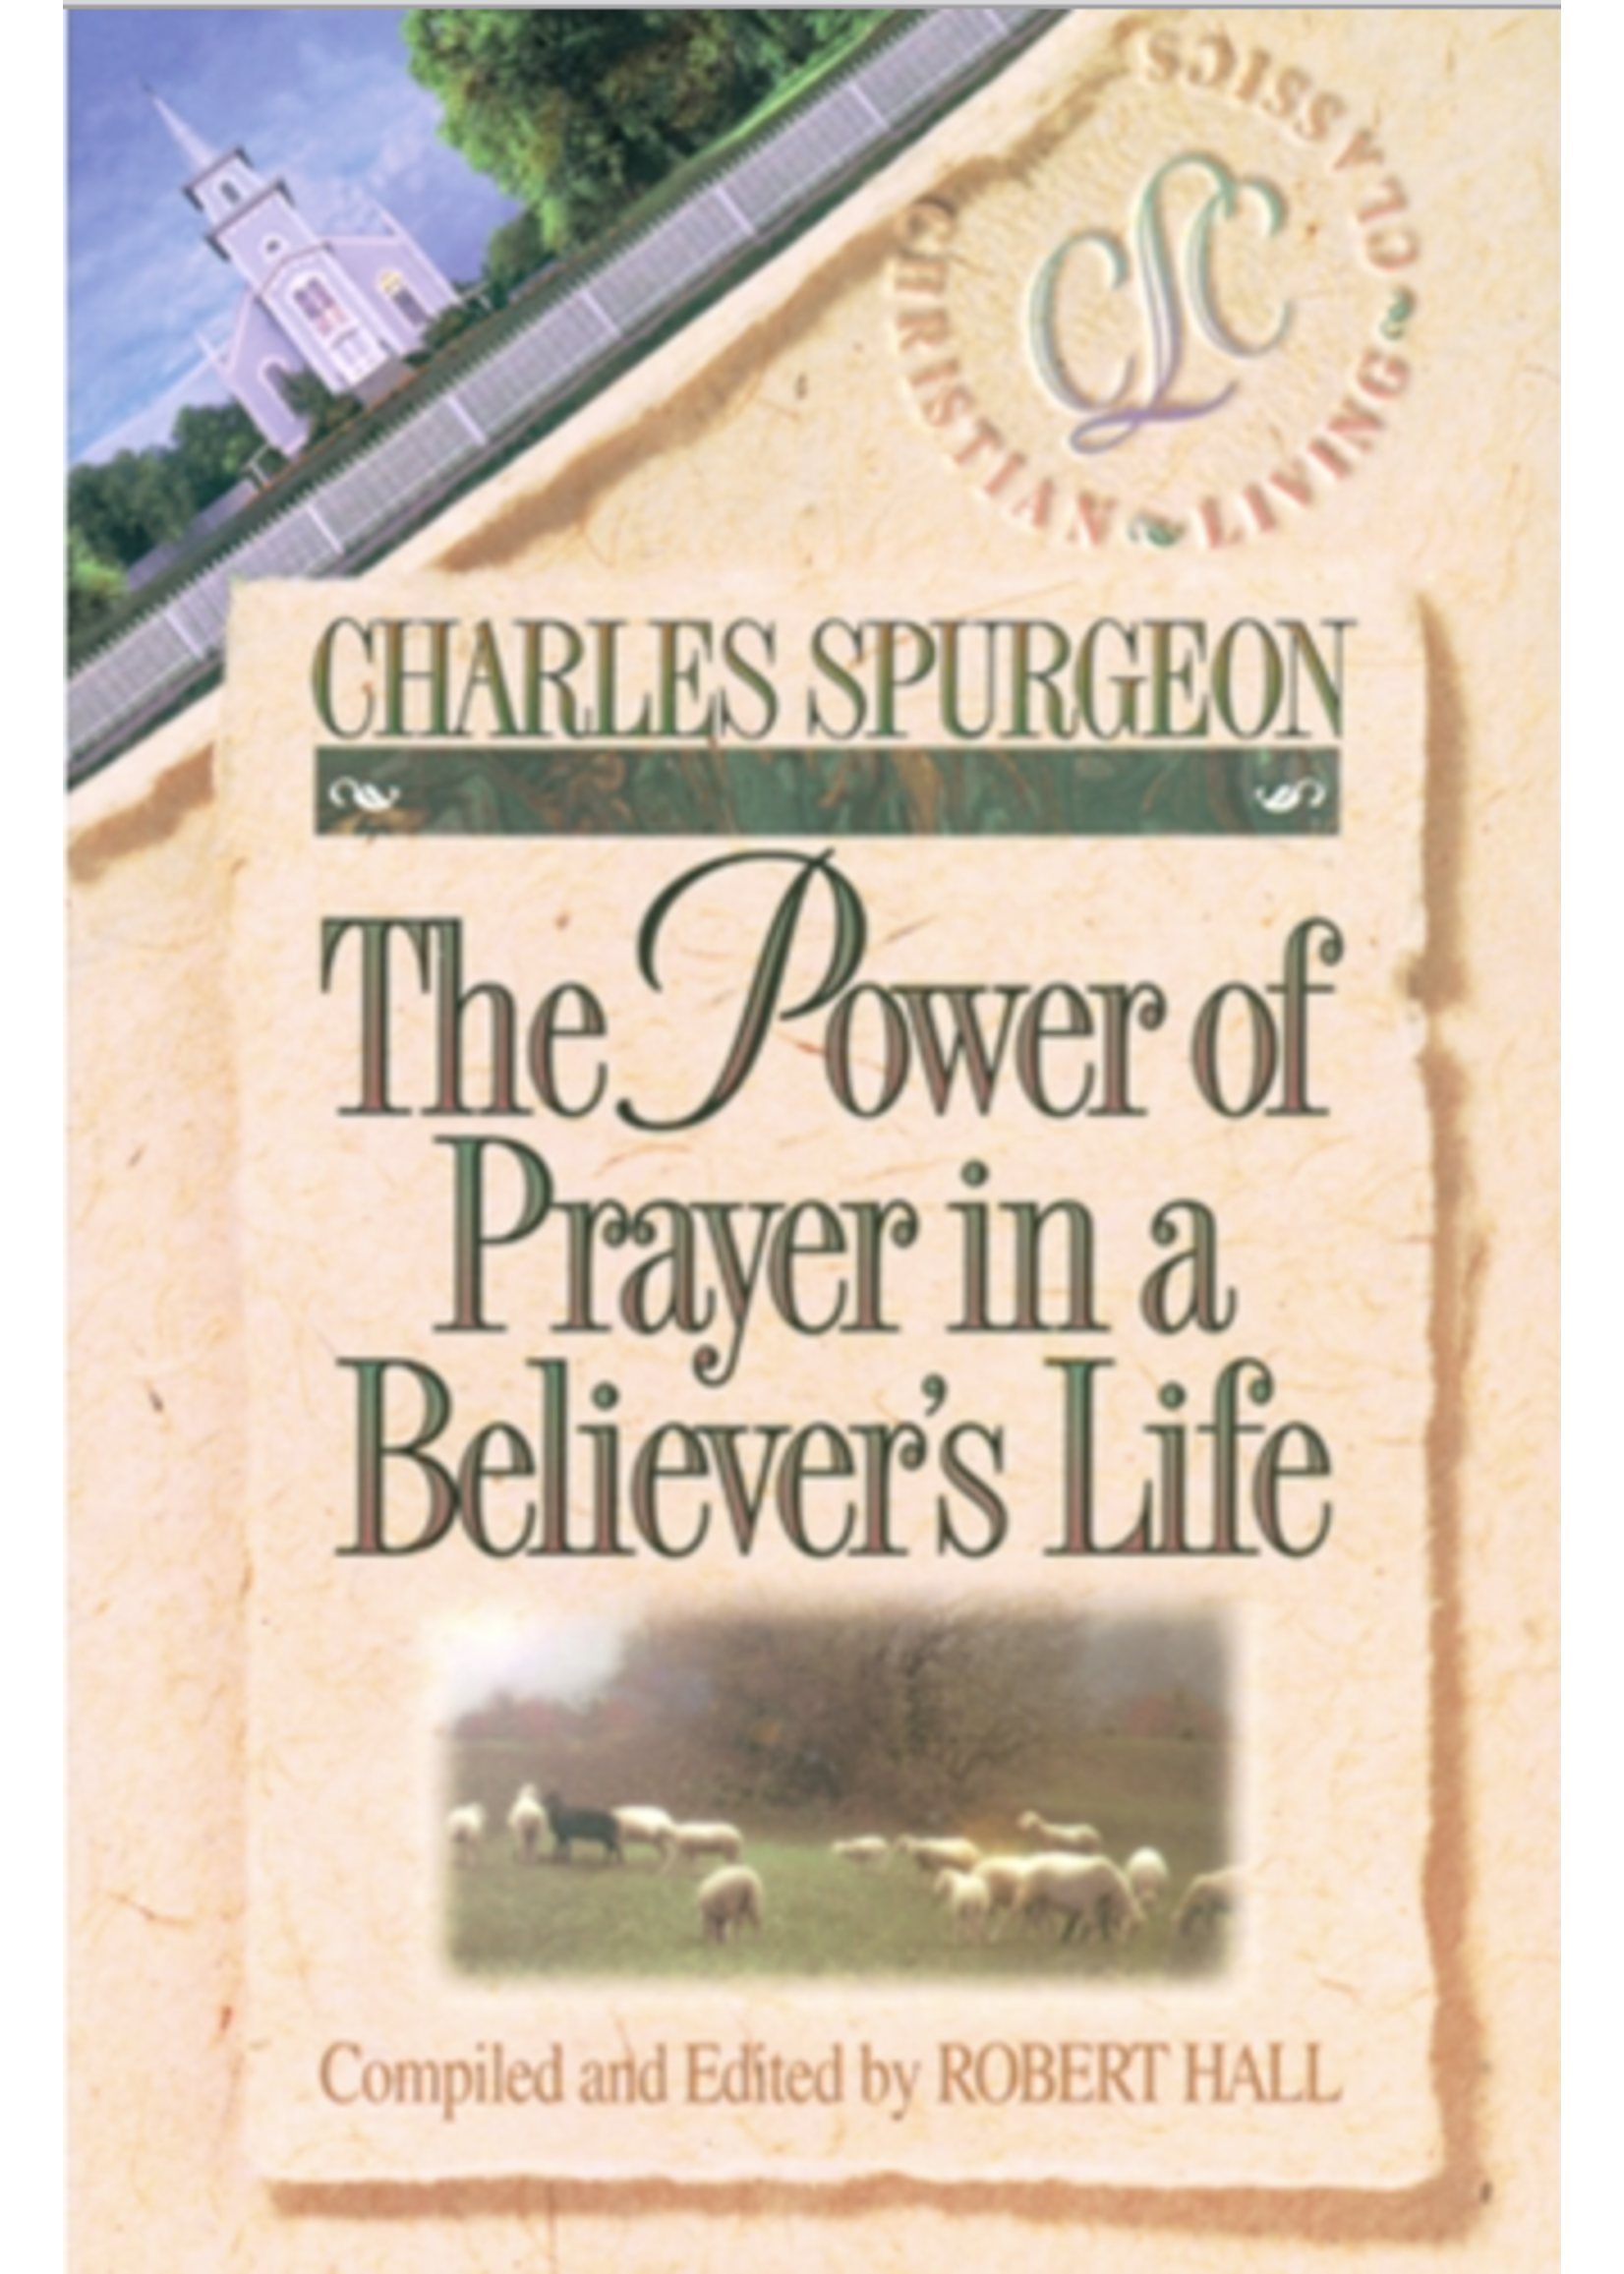 Spurgeon, Charles Power of Prayer in a Believer’s Life